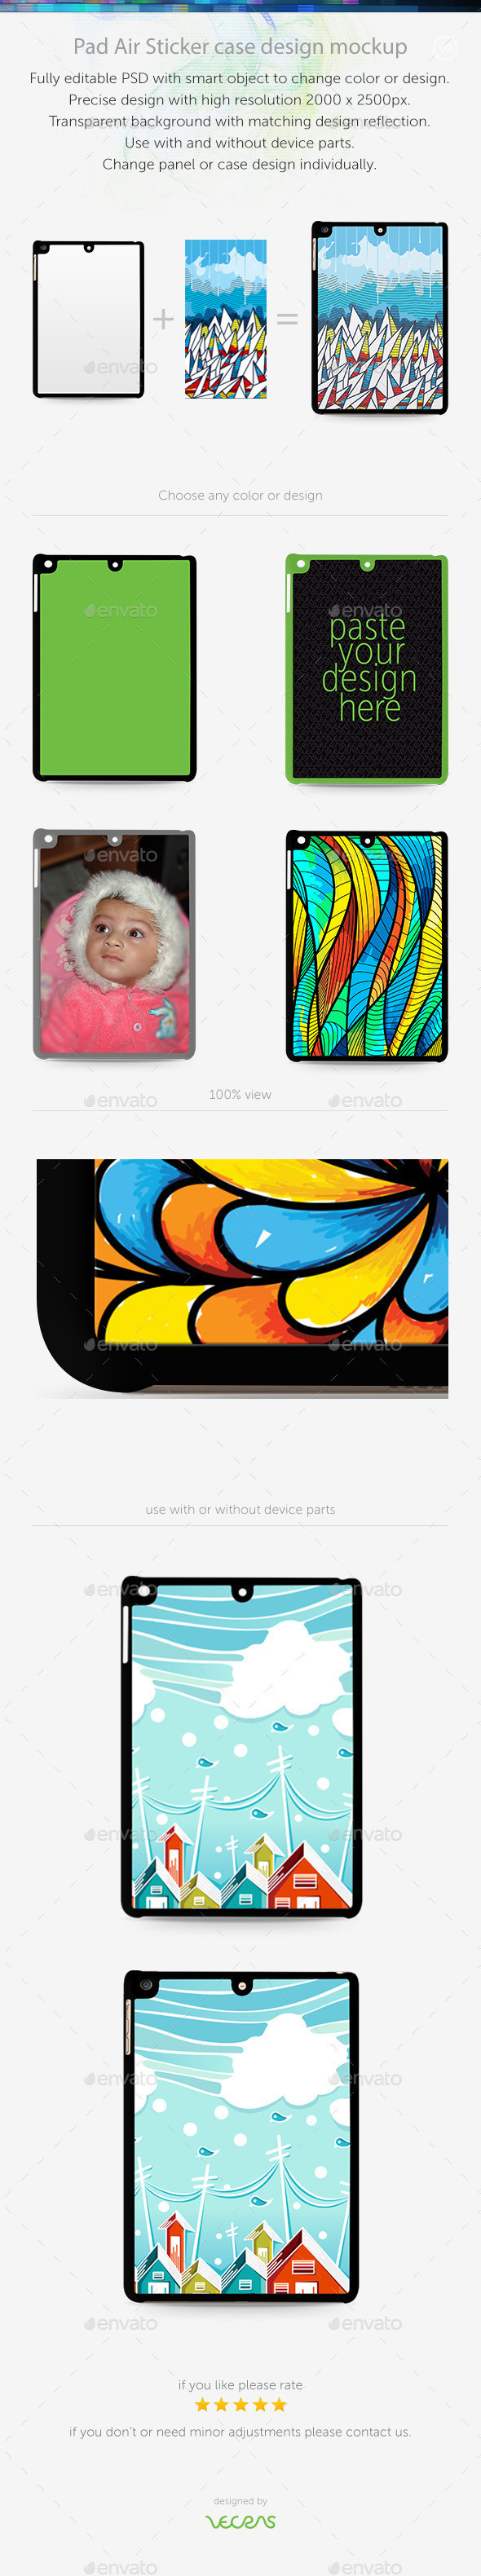 Preview pad air stickercase mockup back